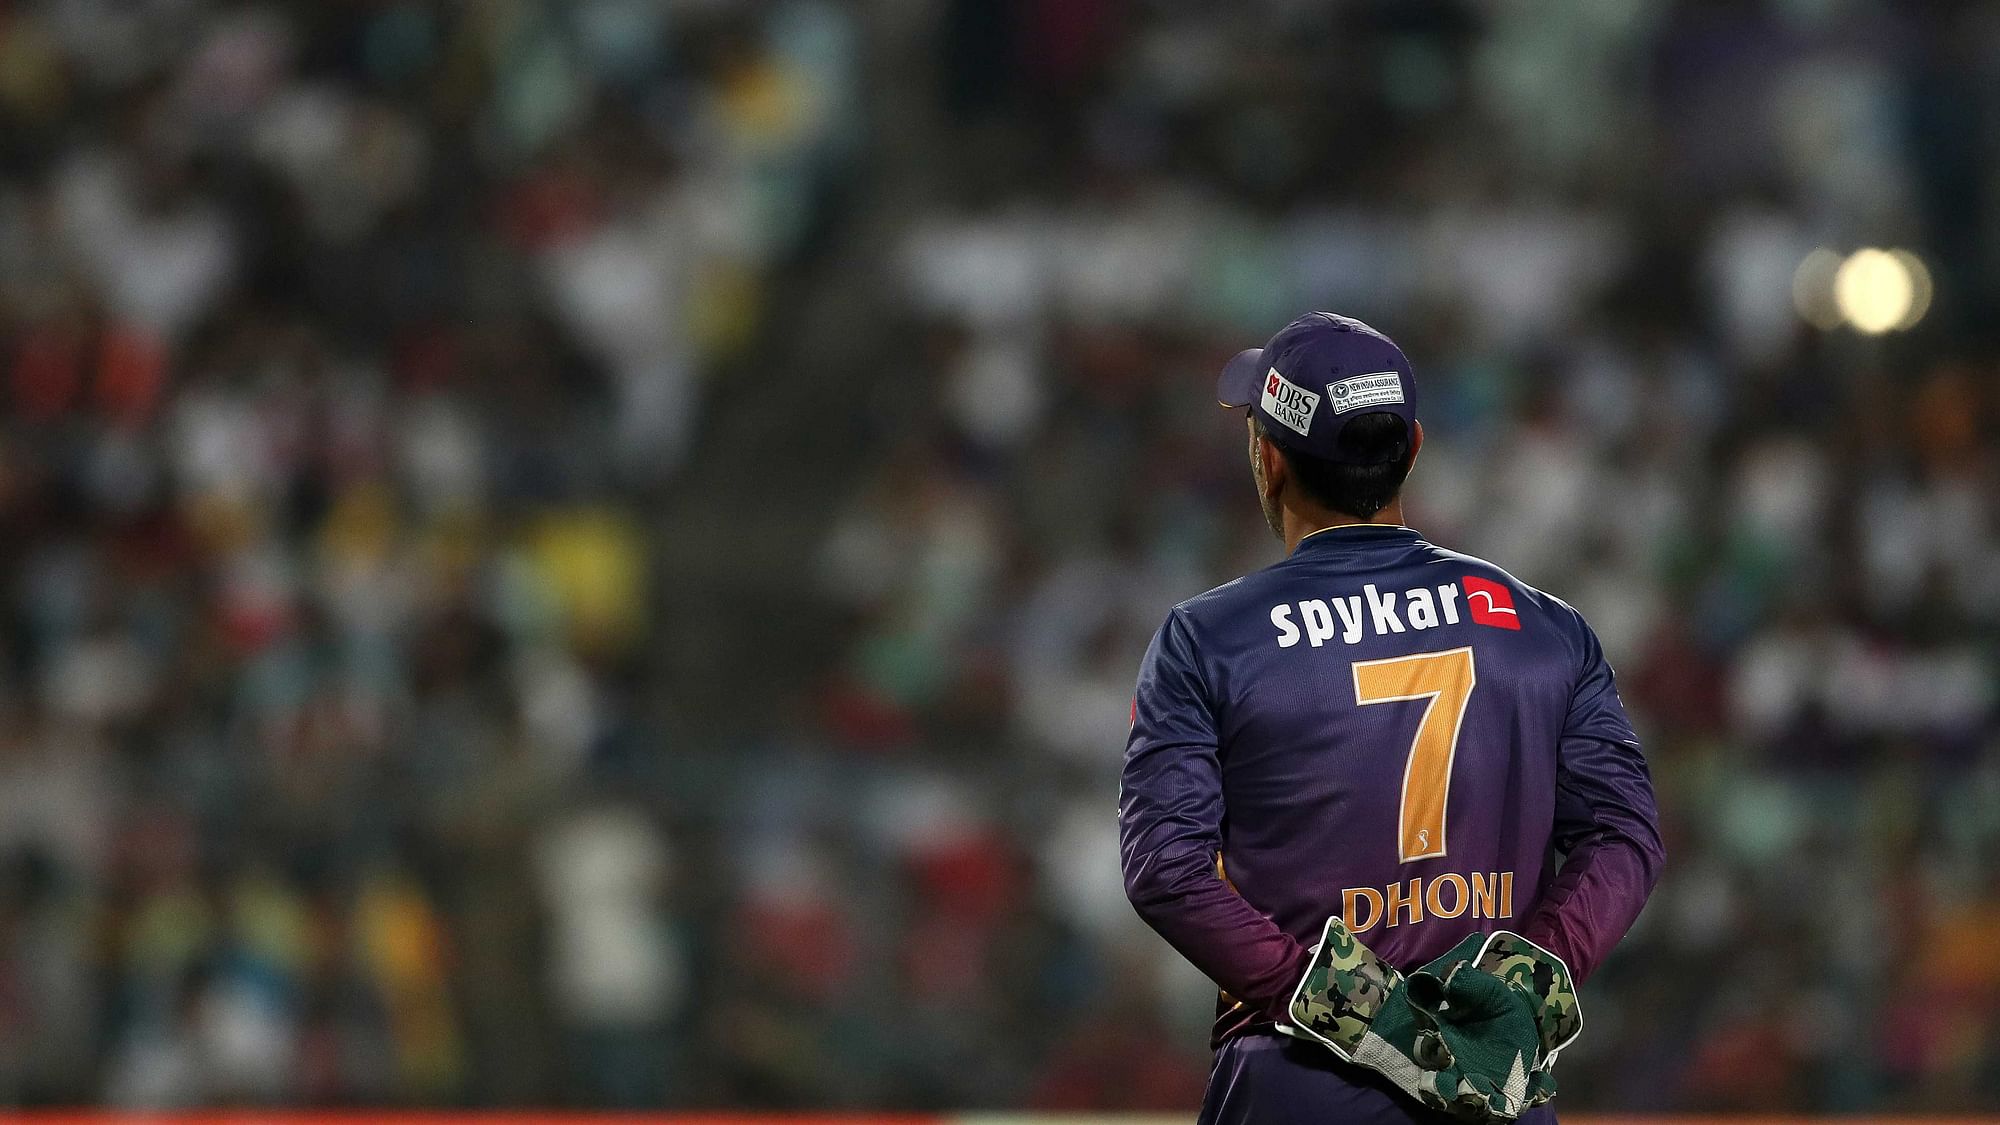 MS Dhoni’s supposed weakness against spin bowling this season has been one of the talking points. (Photo: PTI)